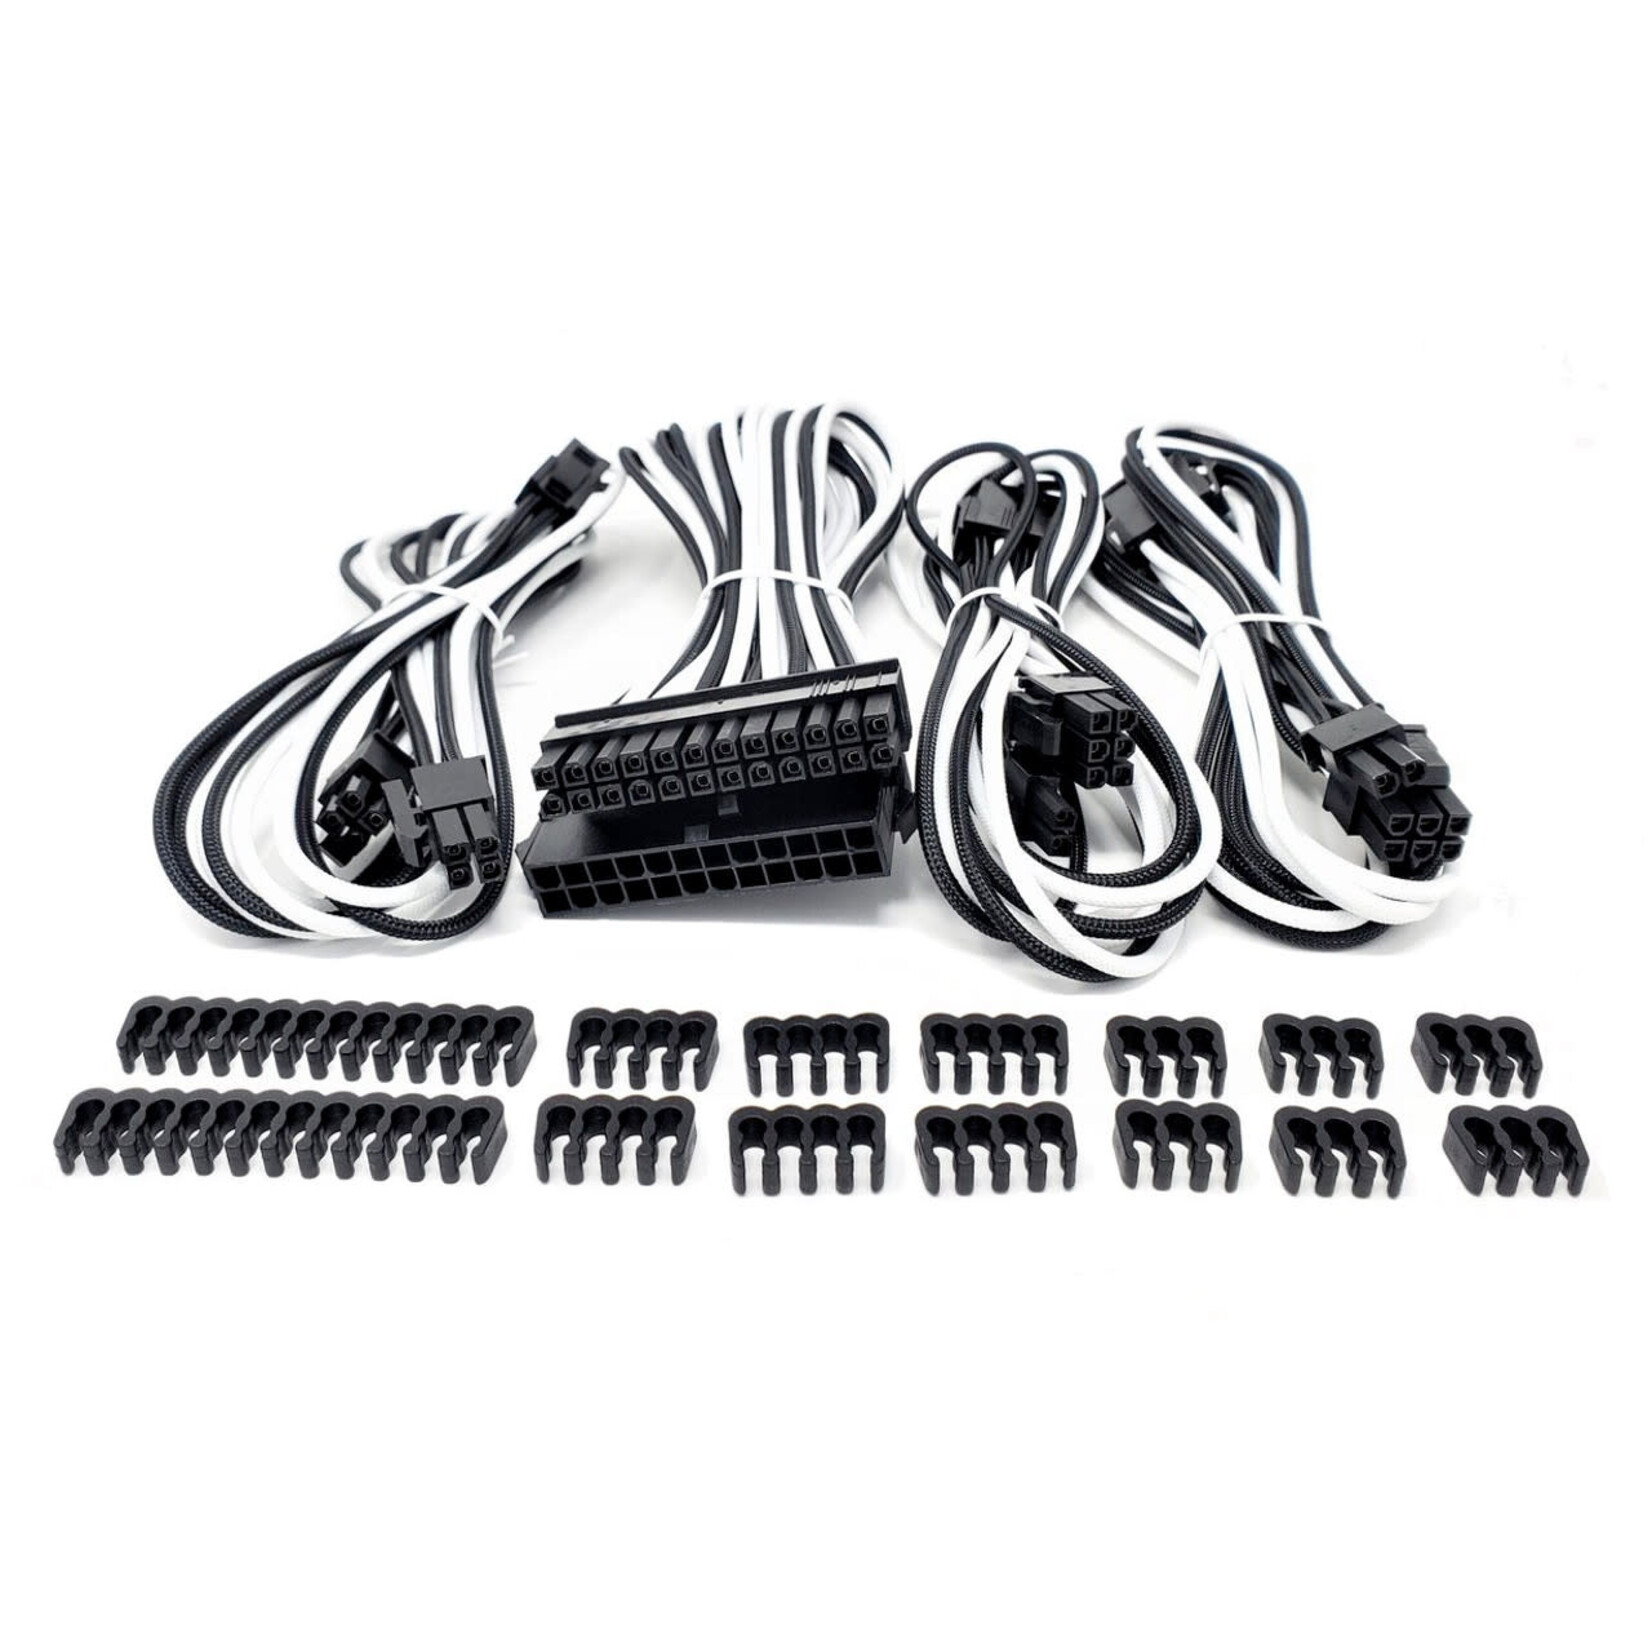 Micro Connectors Micro Connectors Premium Sleeved PSU Cable Extension Kit White/Black